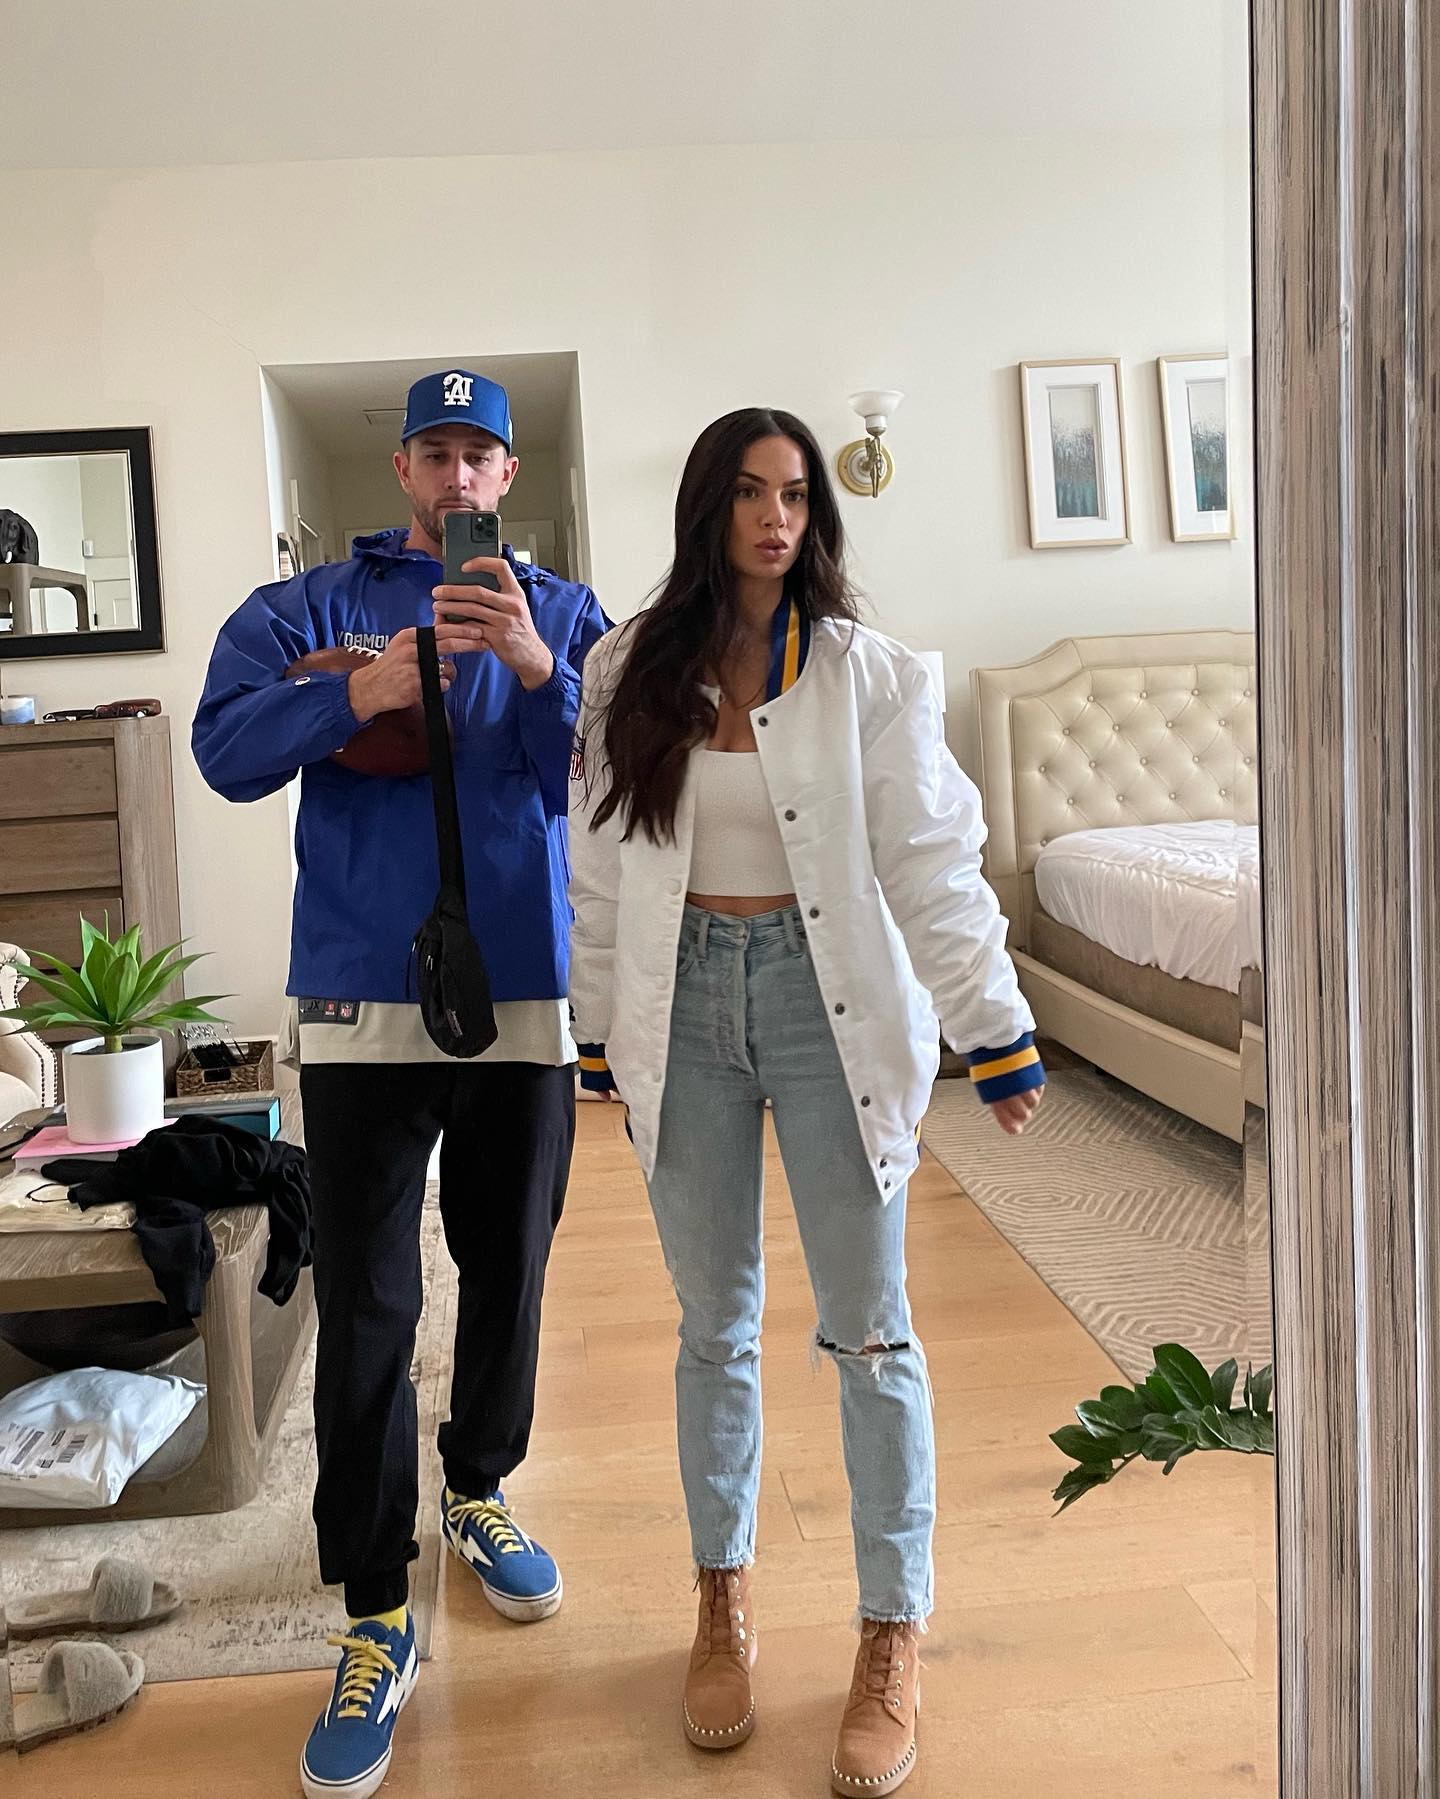 Trevor Plouffe And His Wife Olivia Checking Thier Fit In The Mirror